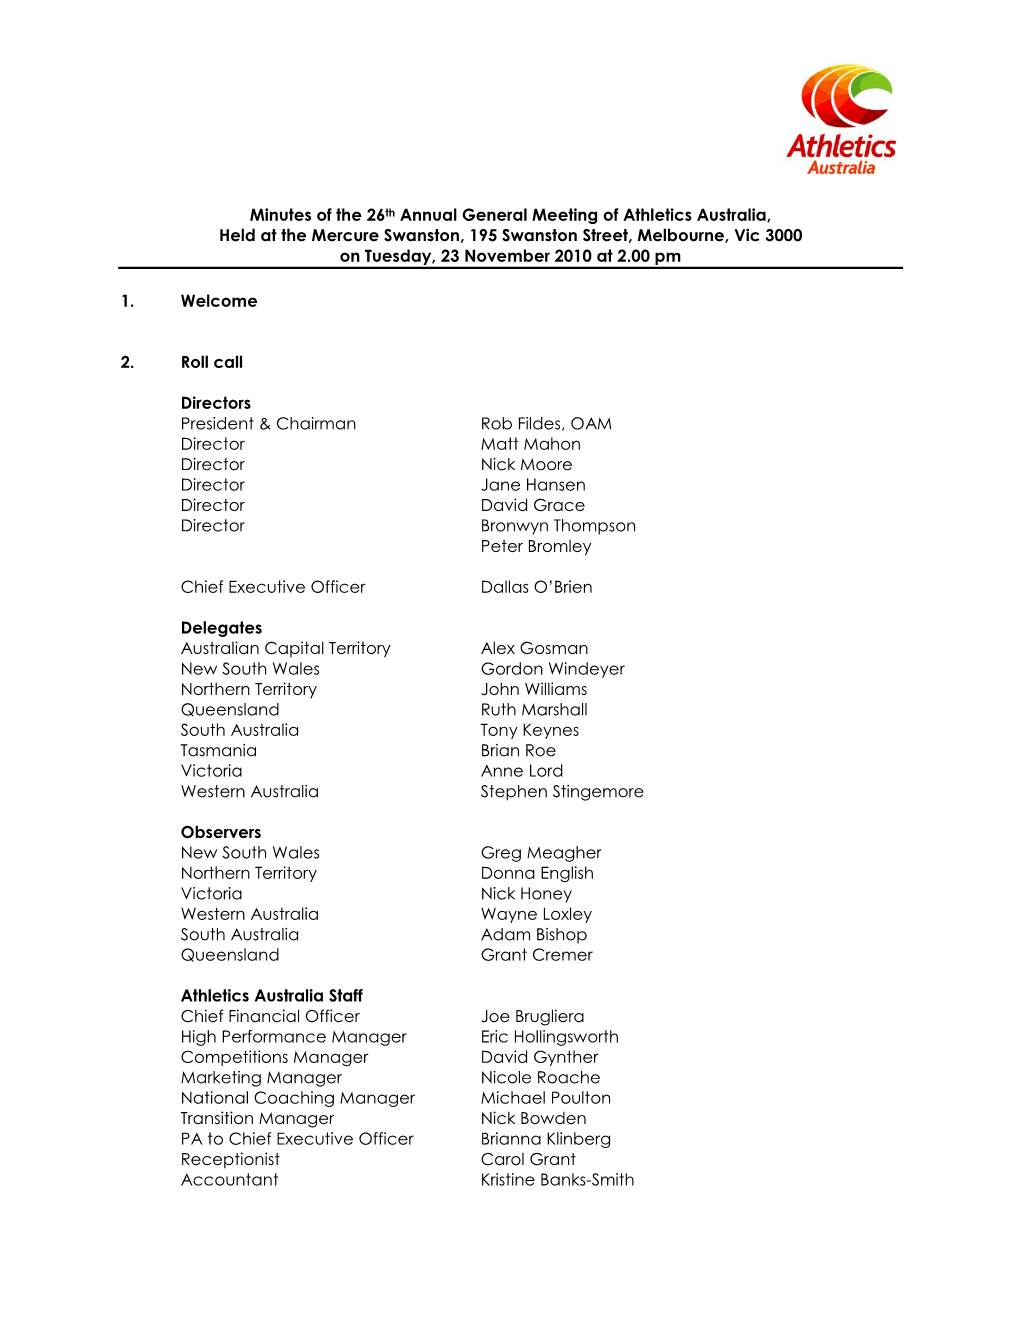 Minutes of the 19Th Annual General Meeting of Athletics Australia, Held on Tuesday, 25 November 2003 at the Mercure Hotel 13 S